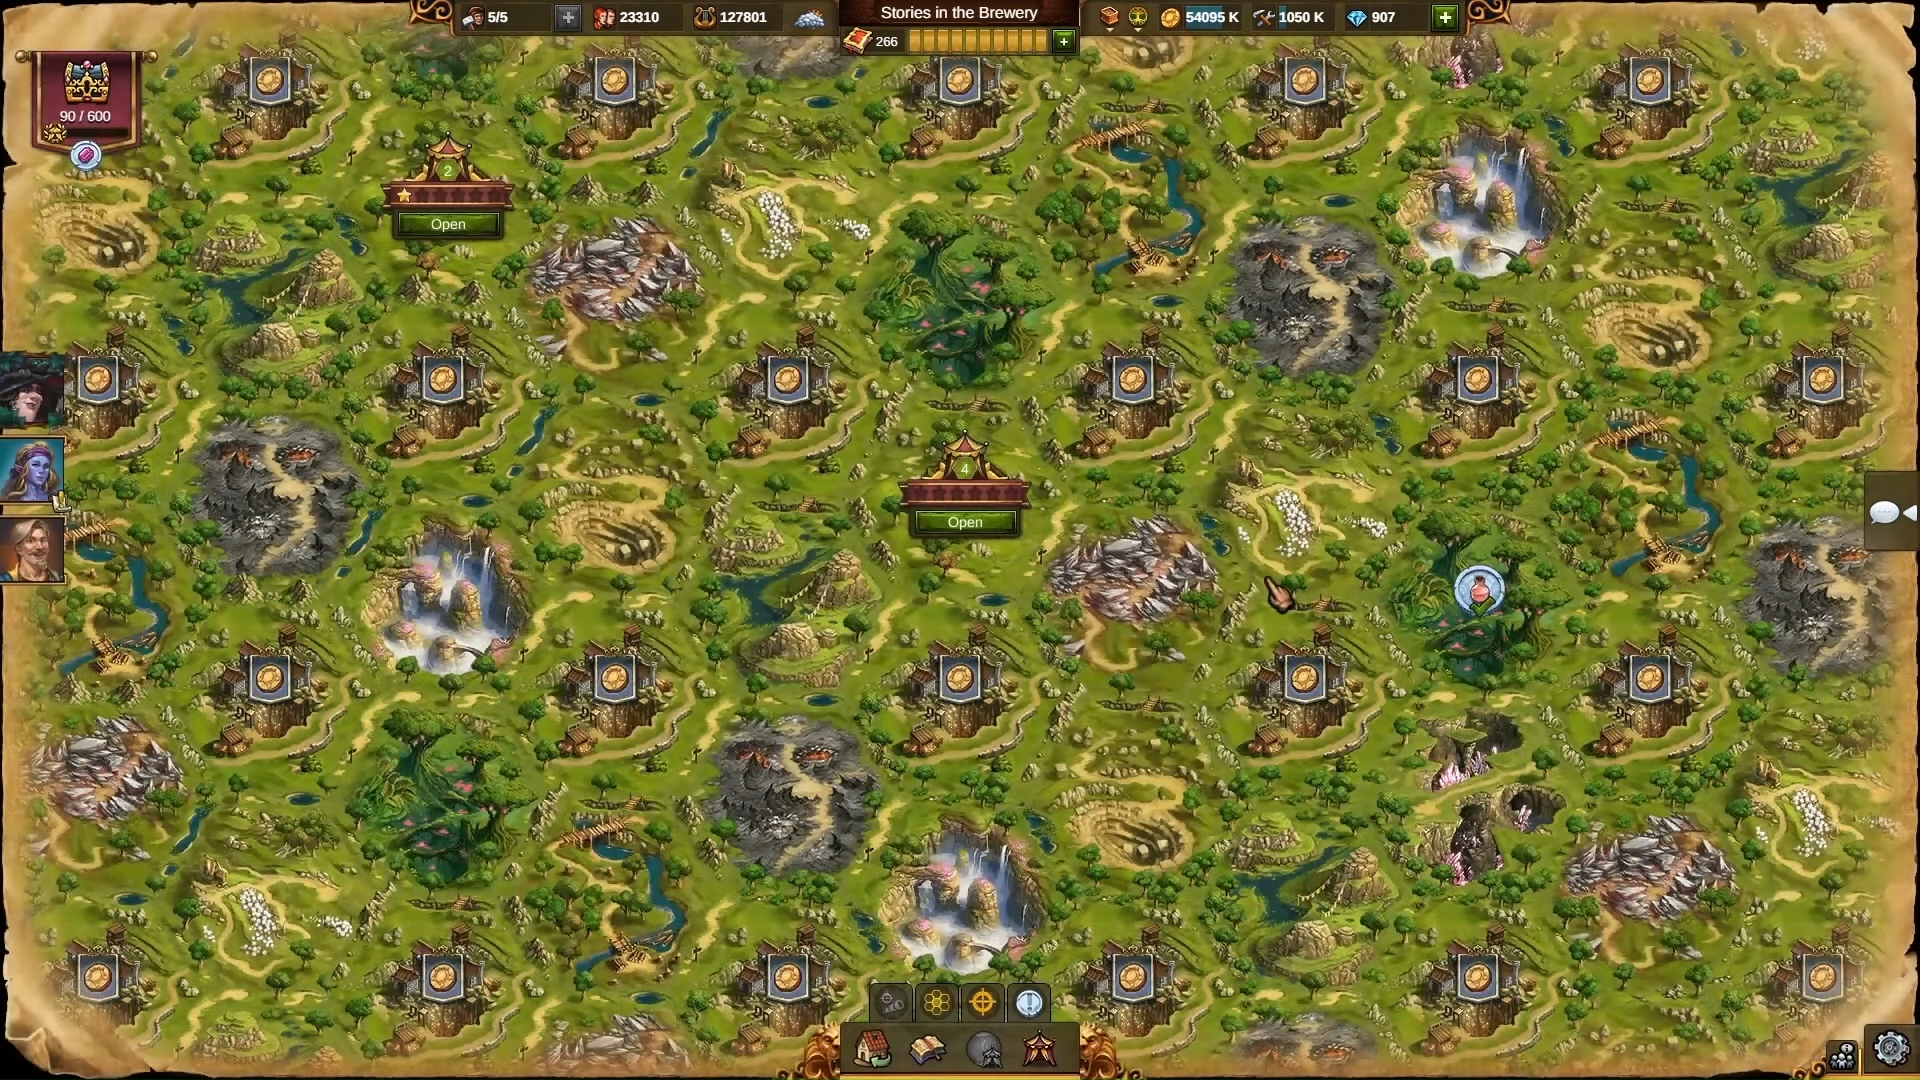 Best free strategy games: a screenshot from the game Elvenar shows a large map with various settlements on it.